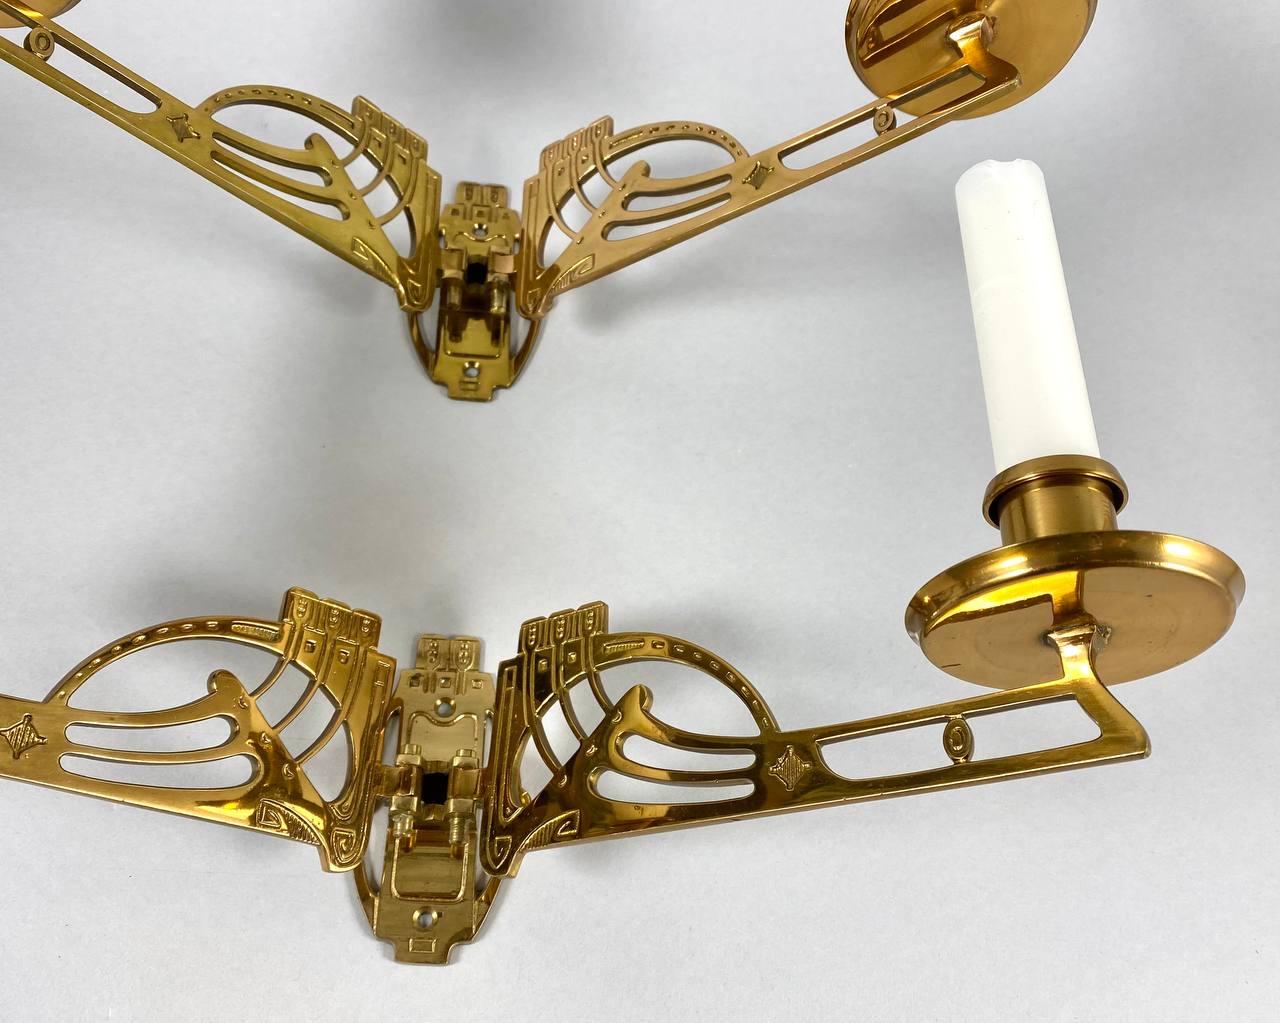 Charming Pair of Art Nouveau Style Piano Candelabra Vintage Brass Candlesticks 1